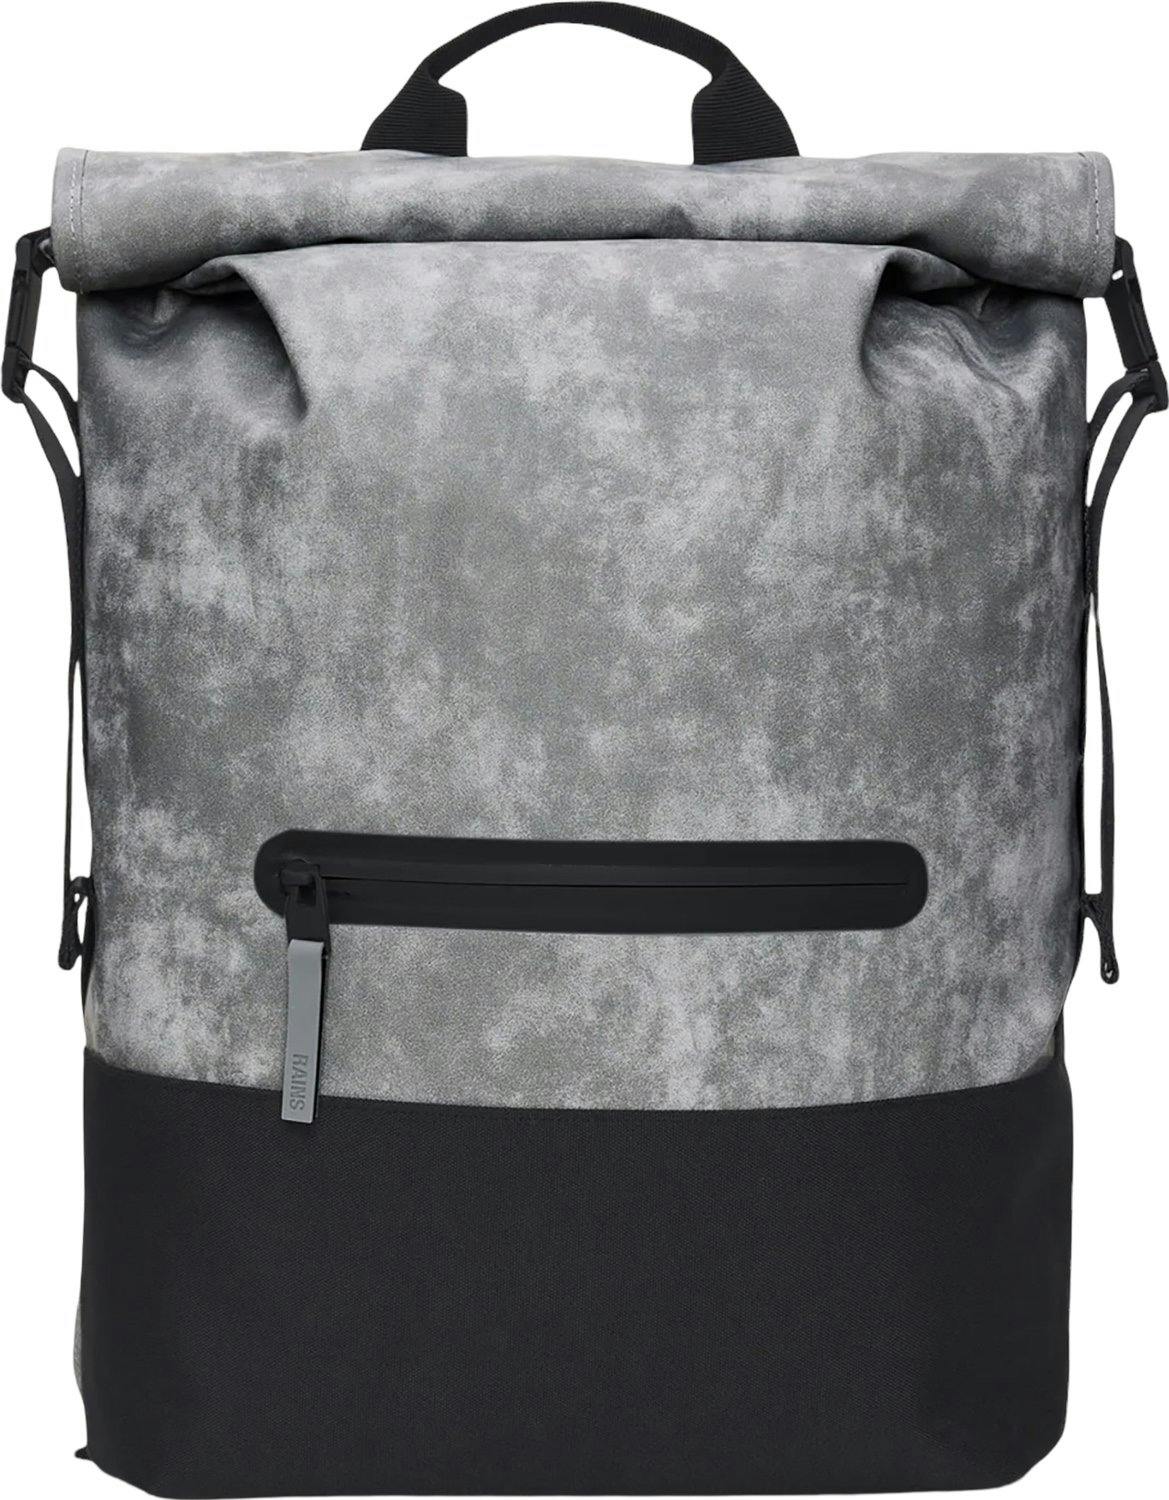 Product image for Trail Rolltop Backpack 19L